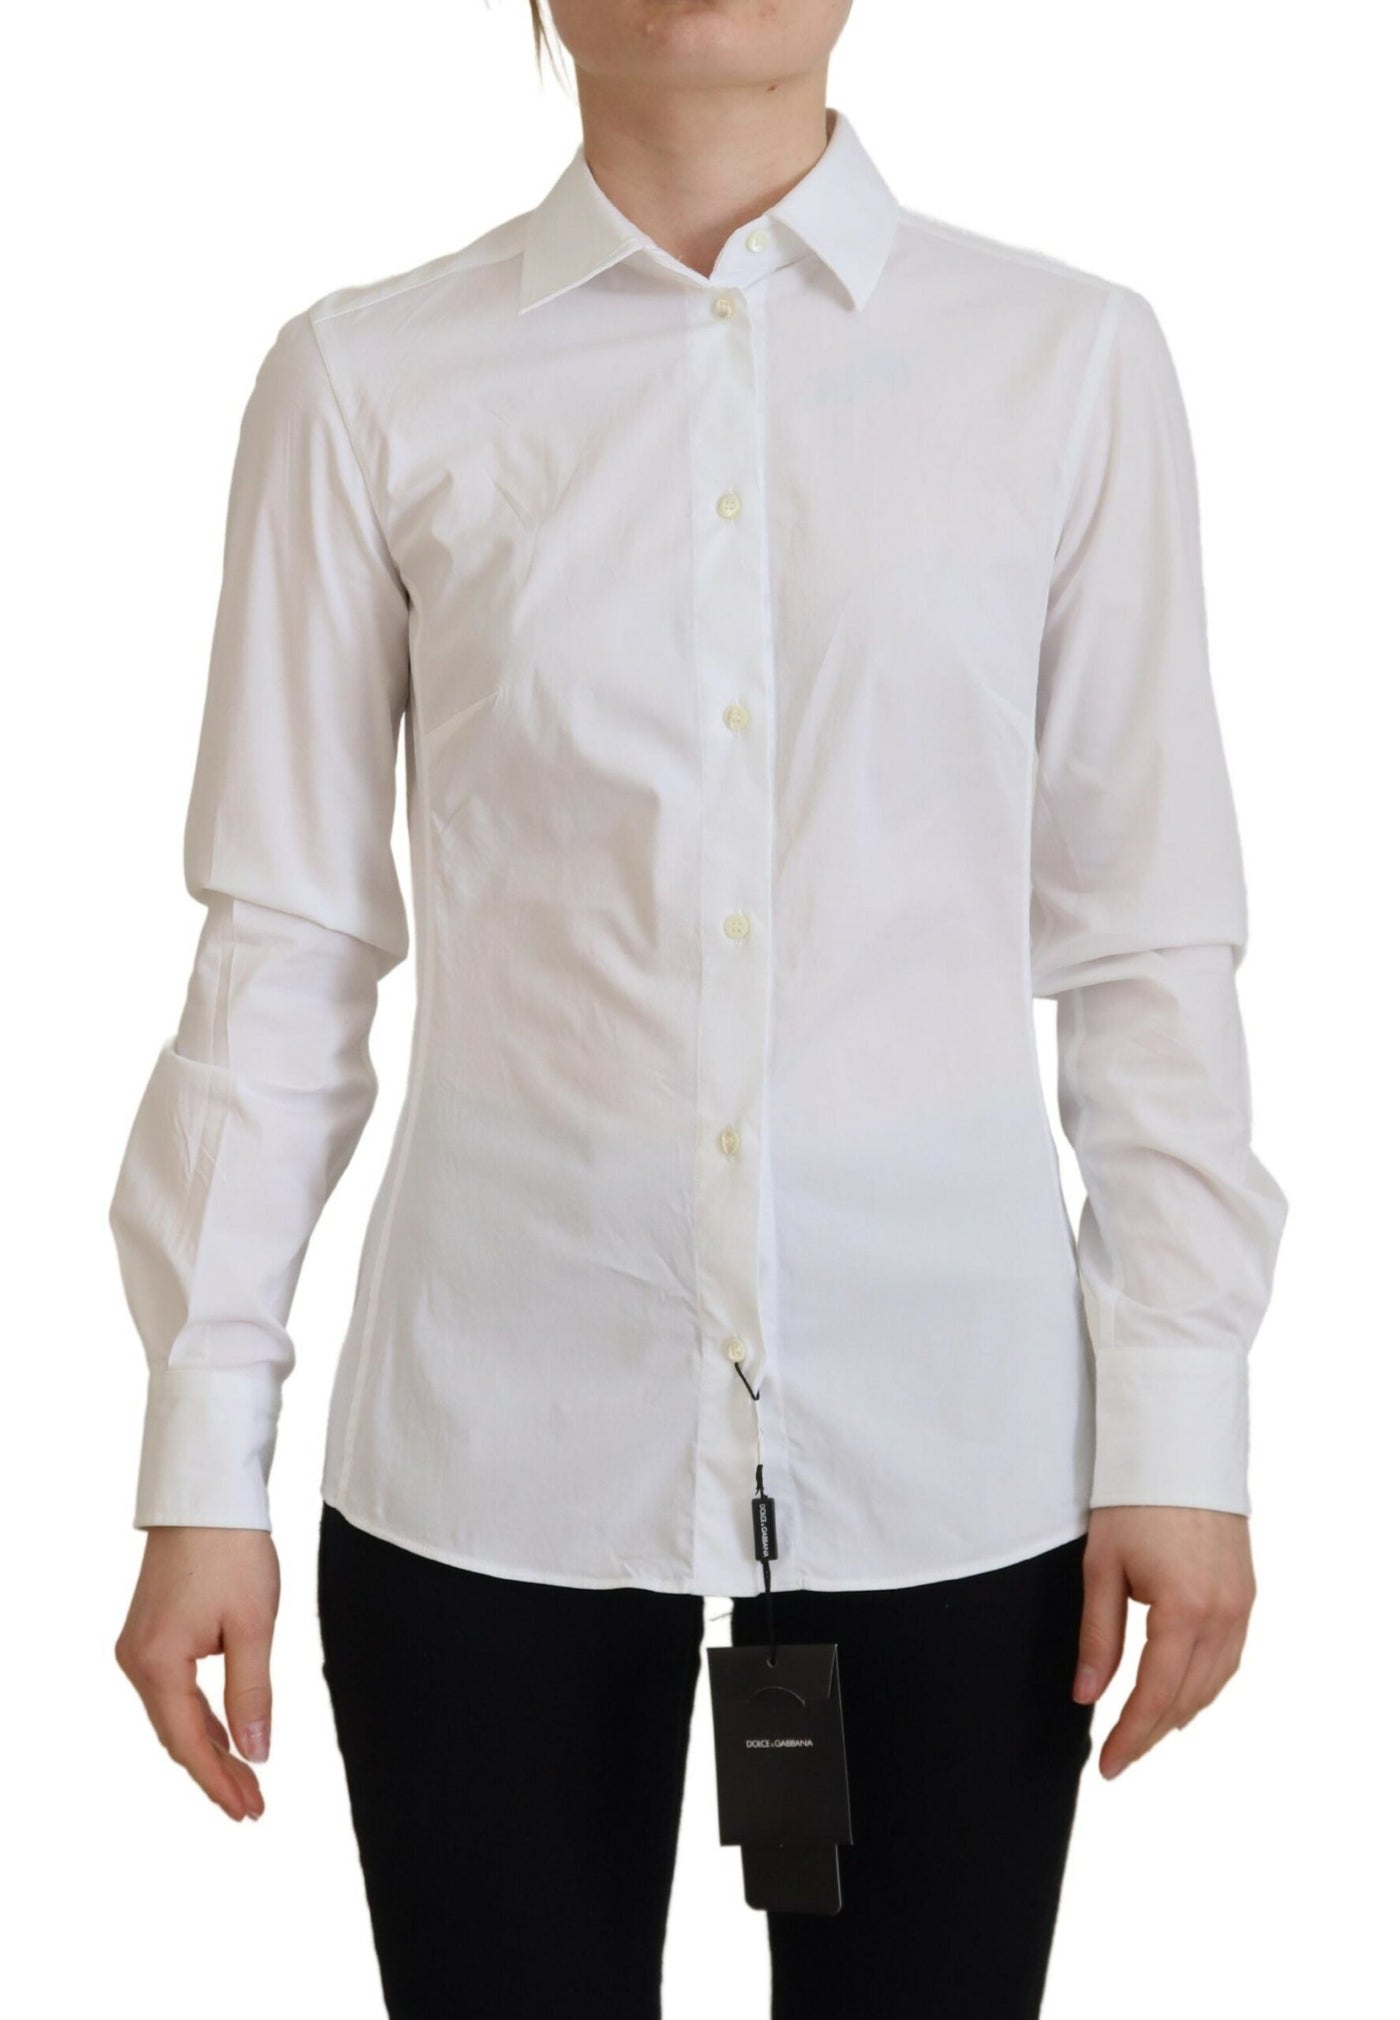 White Cotton Collared Long Sleeves Formal Top